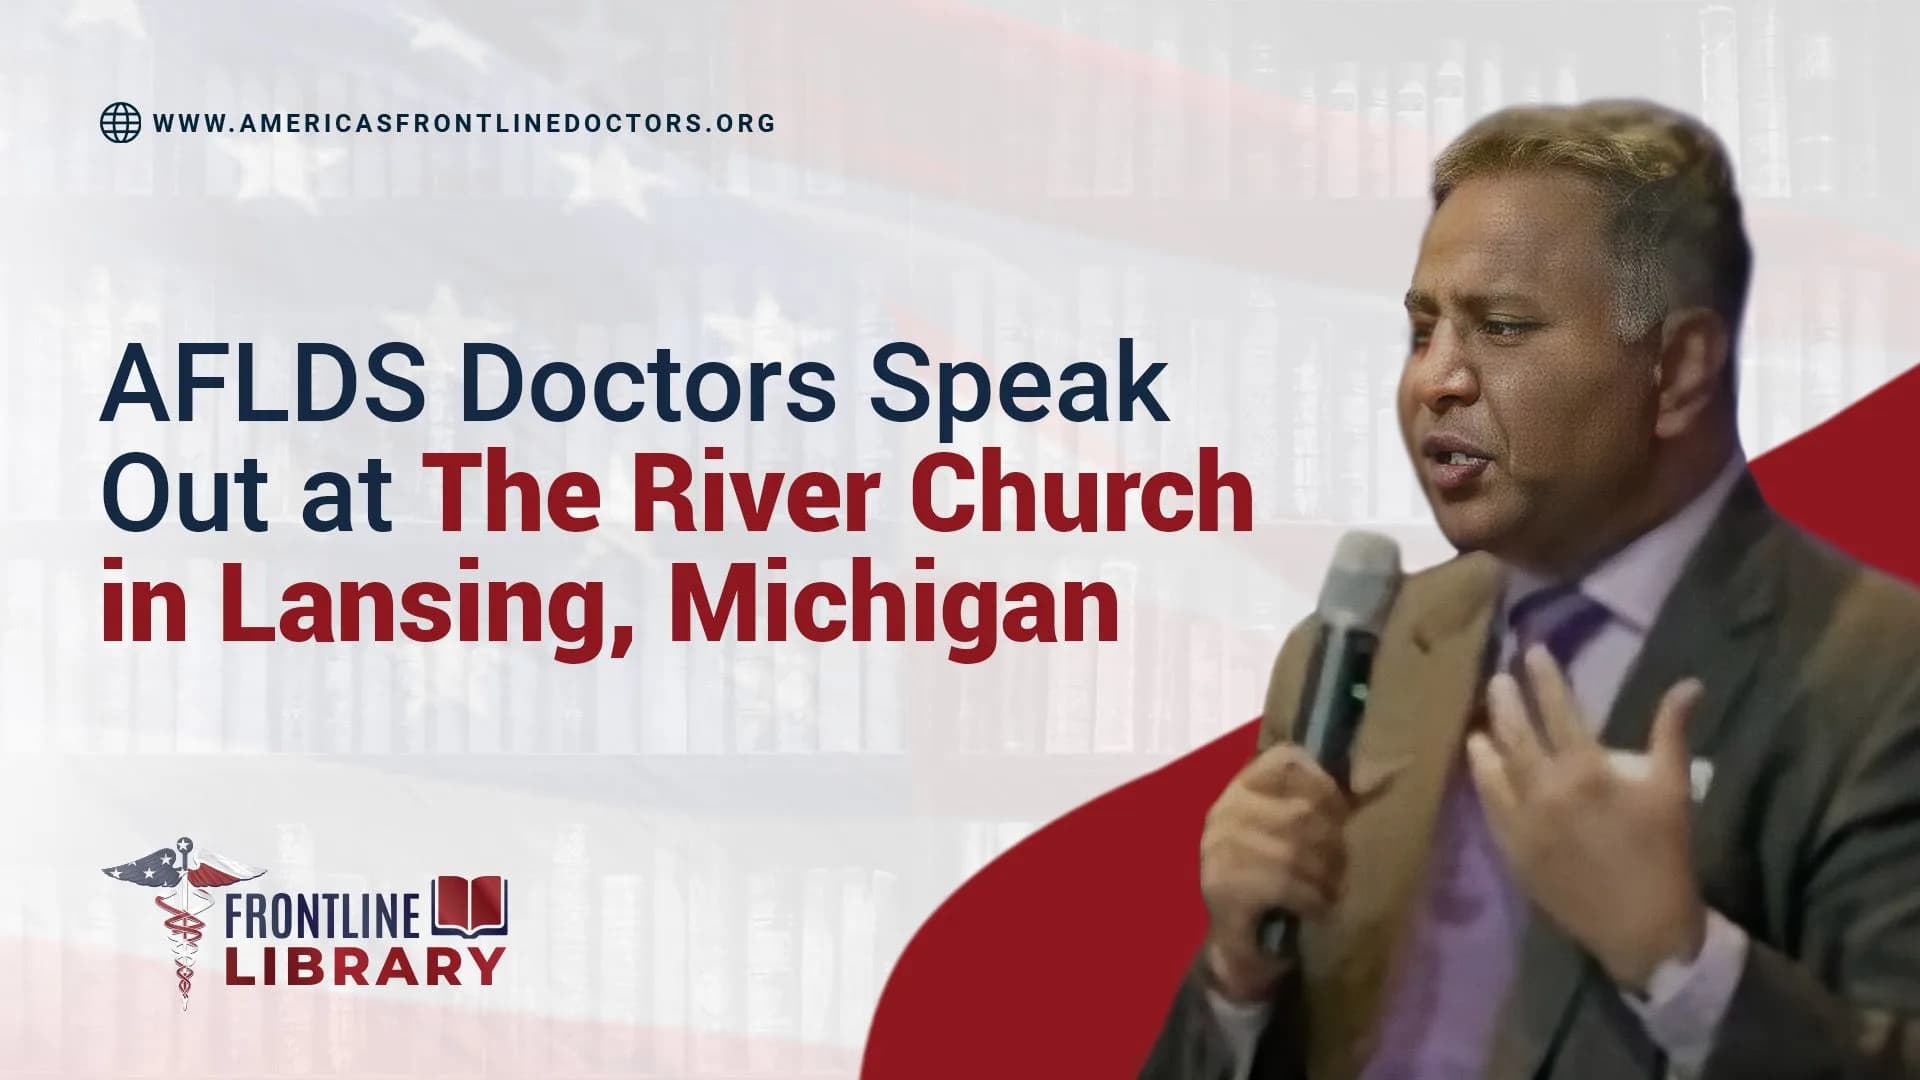 AFLDS Doctors Speak Out at The River Church in Lansing, Michigan  